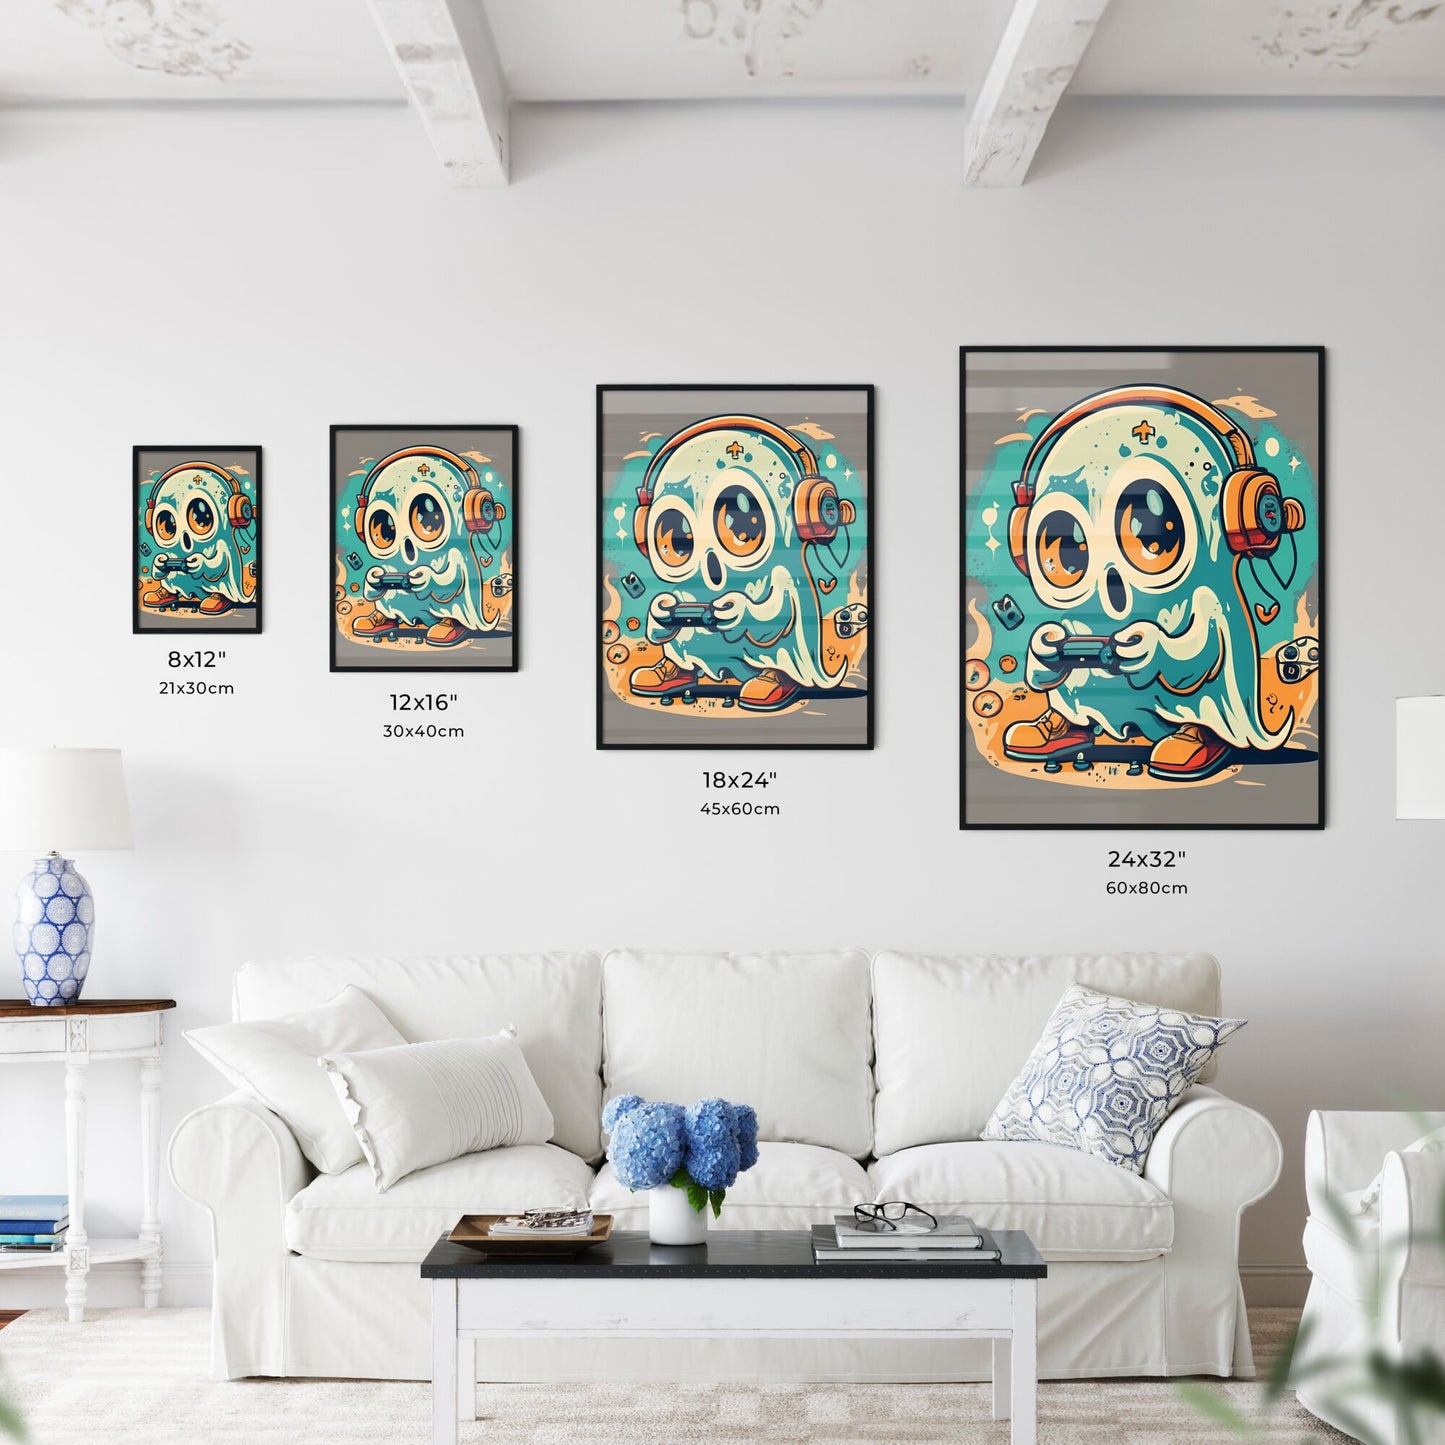 A Cartoon Of A Ghost Playing Video Games Art Print Default Title